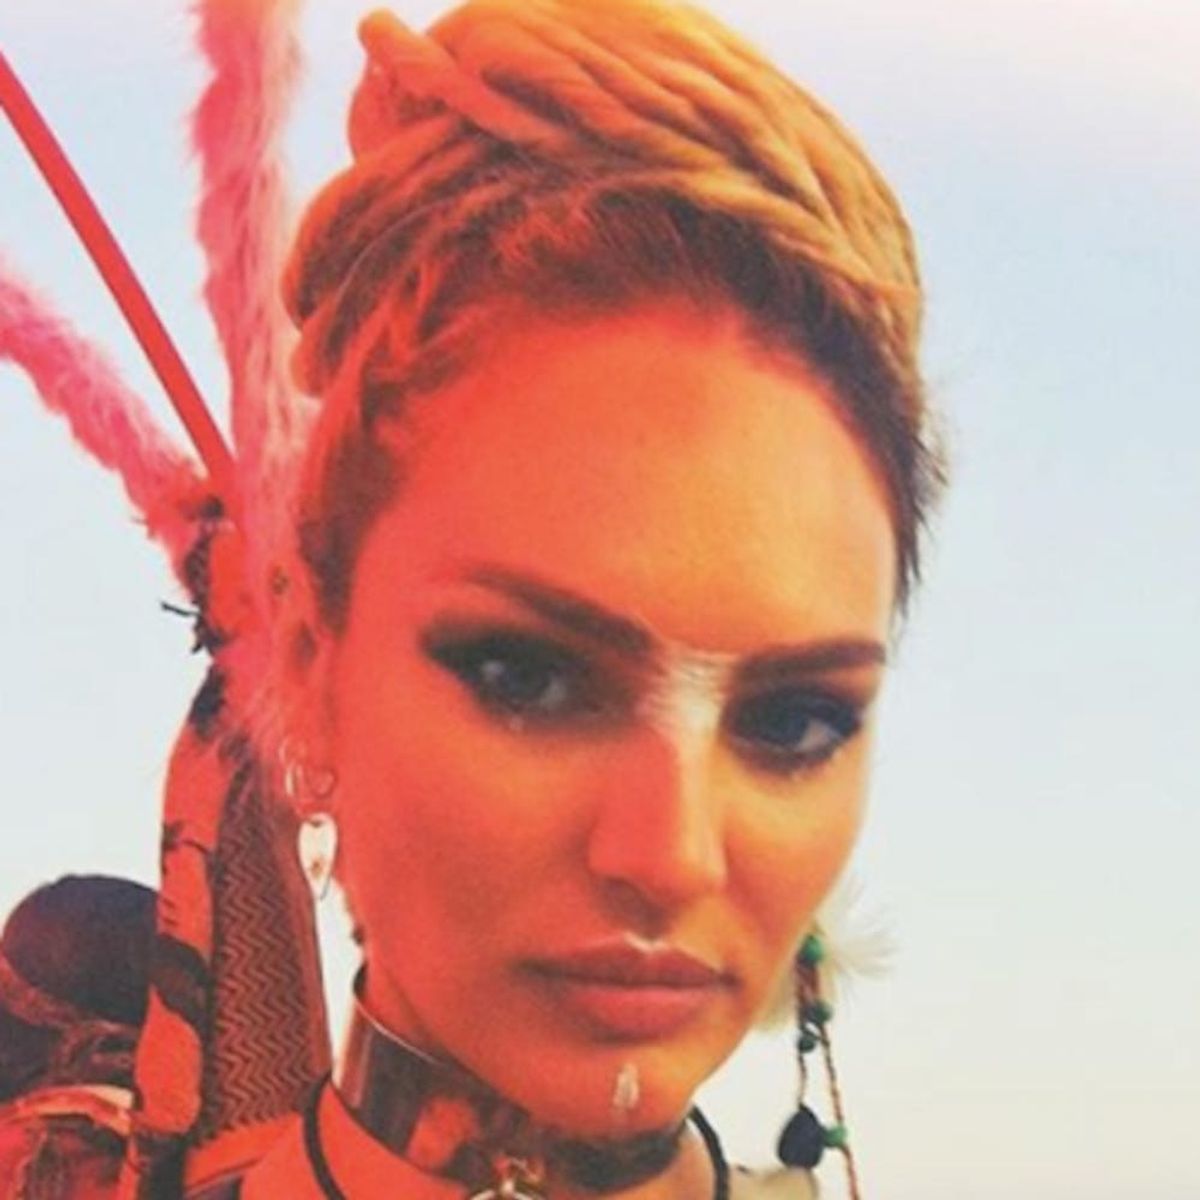 Check Out the Wildest Celebrity Looks from Burning Man 2017